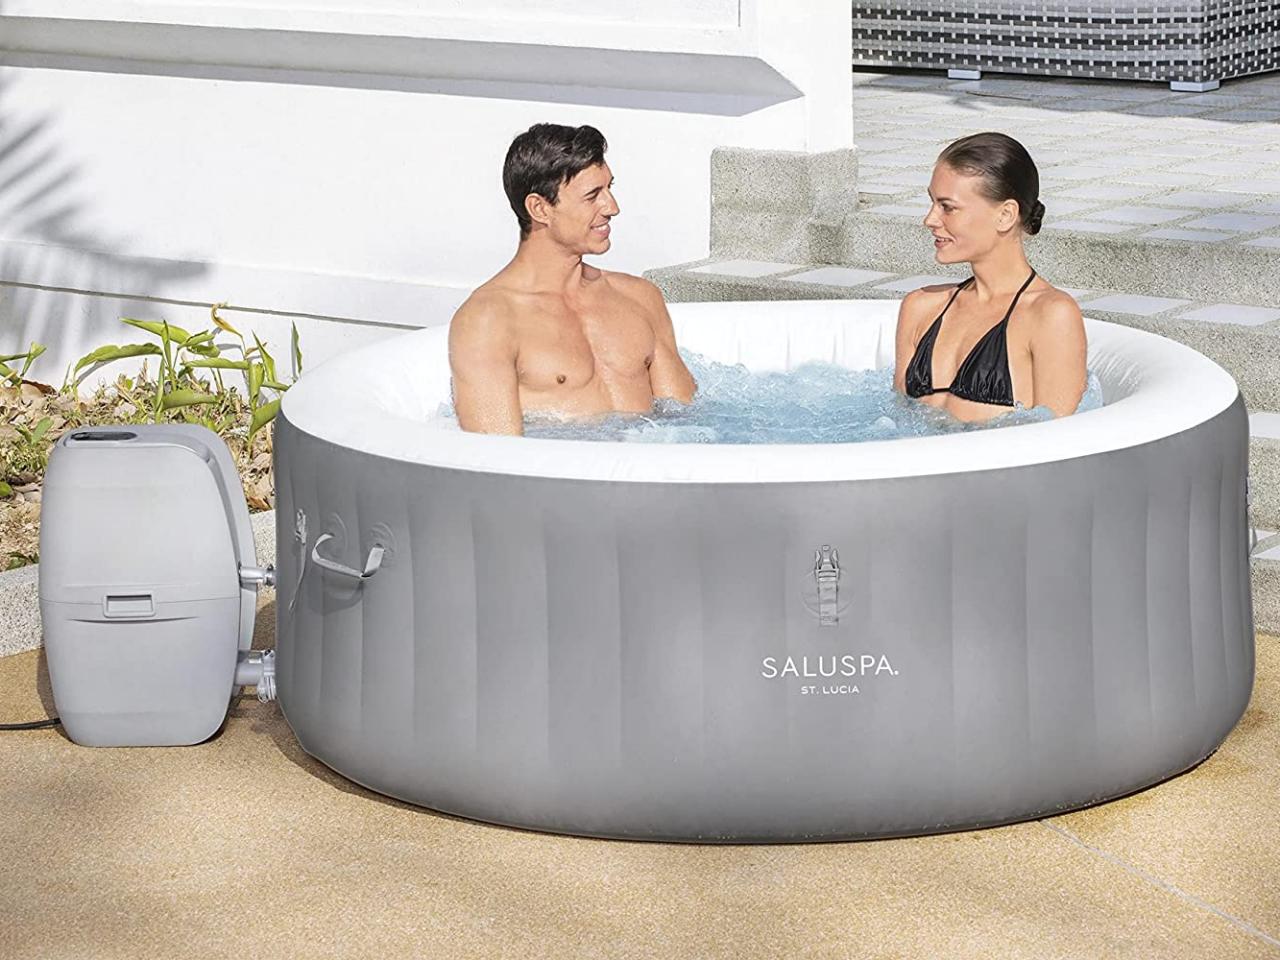 https://hgtvhome.sndimg.com/content/dam/images/hgtv/products/2023/5/3/rx_amazon_bestway-st-lucia-saluspa-2-to-3-person-inflatable-round-outdoor-hot-tub-.jpeg.rend.hgtvcom.1280.960.suffix/1683139031707.jpeg